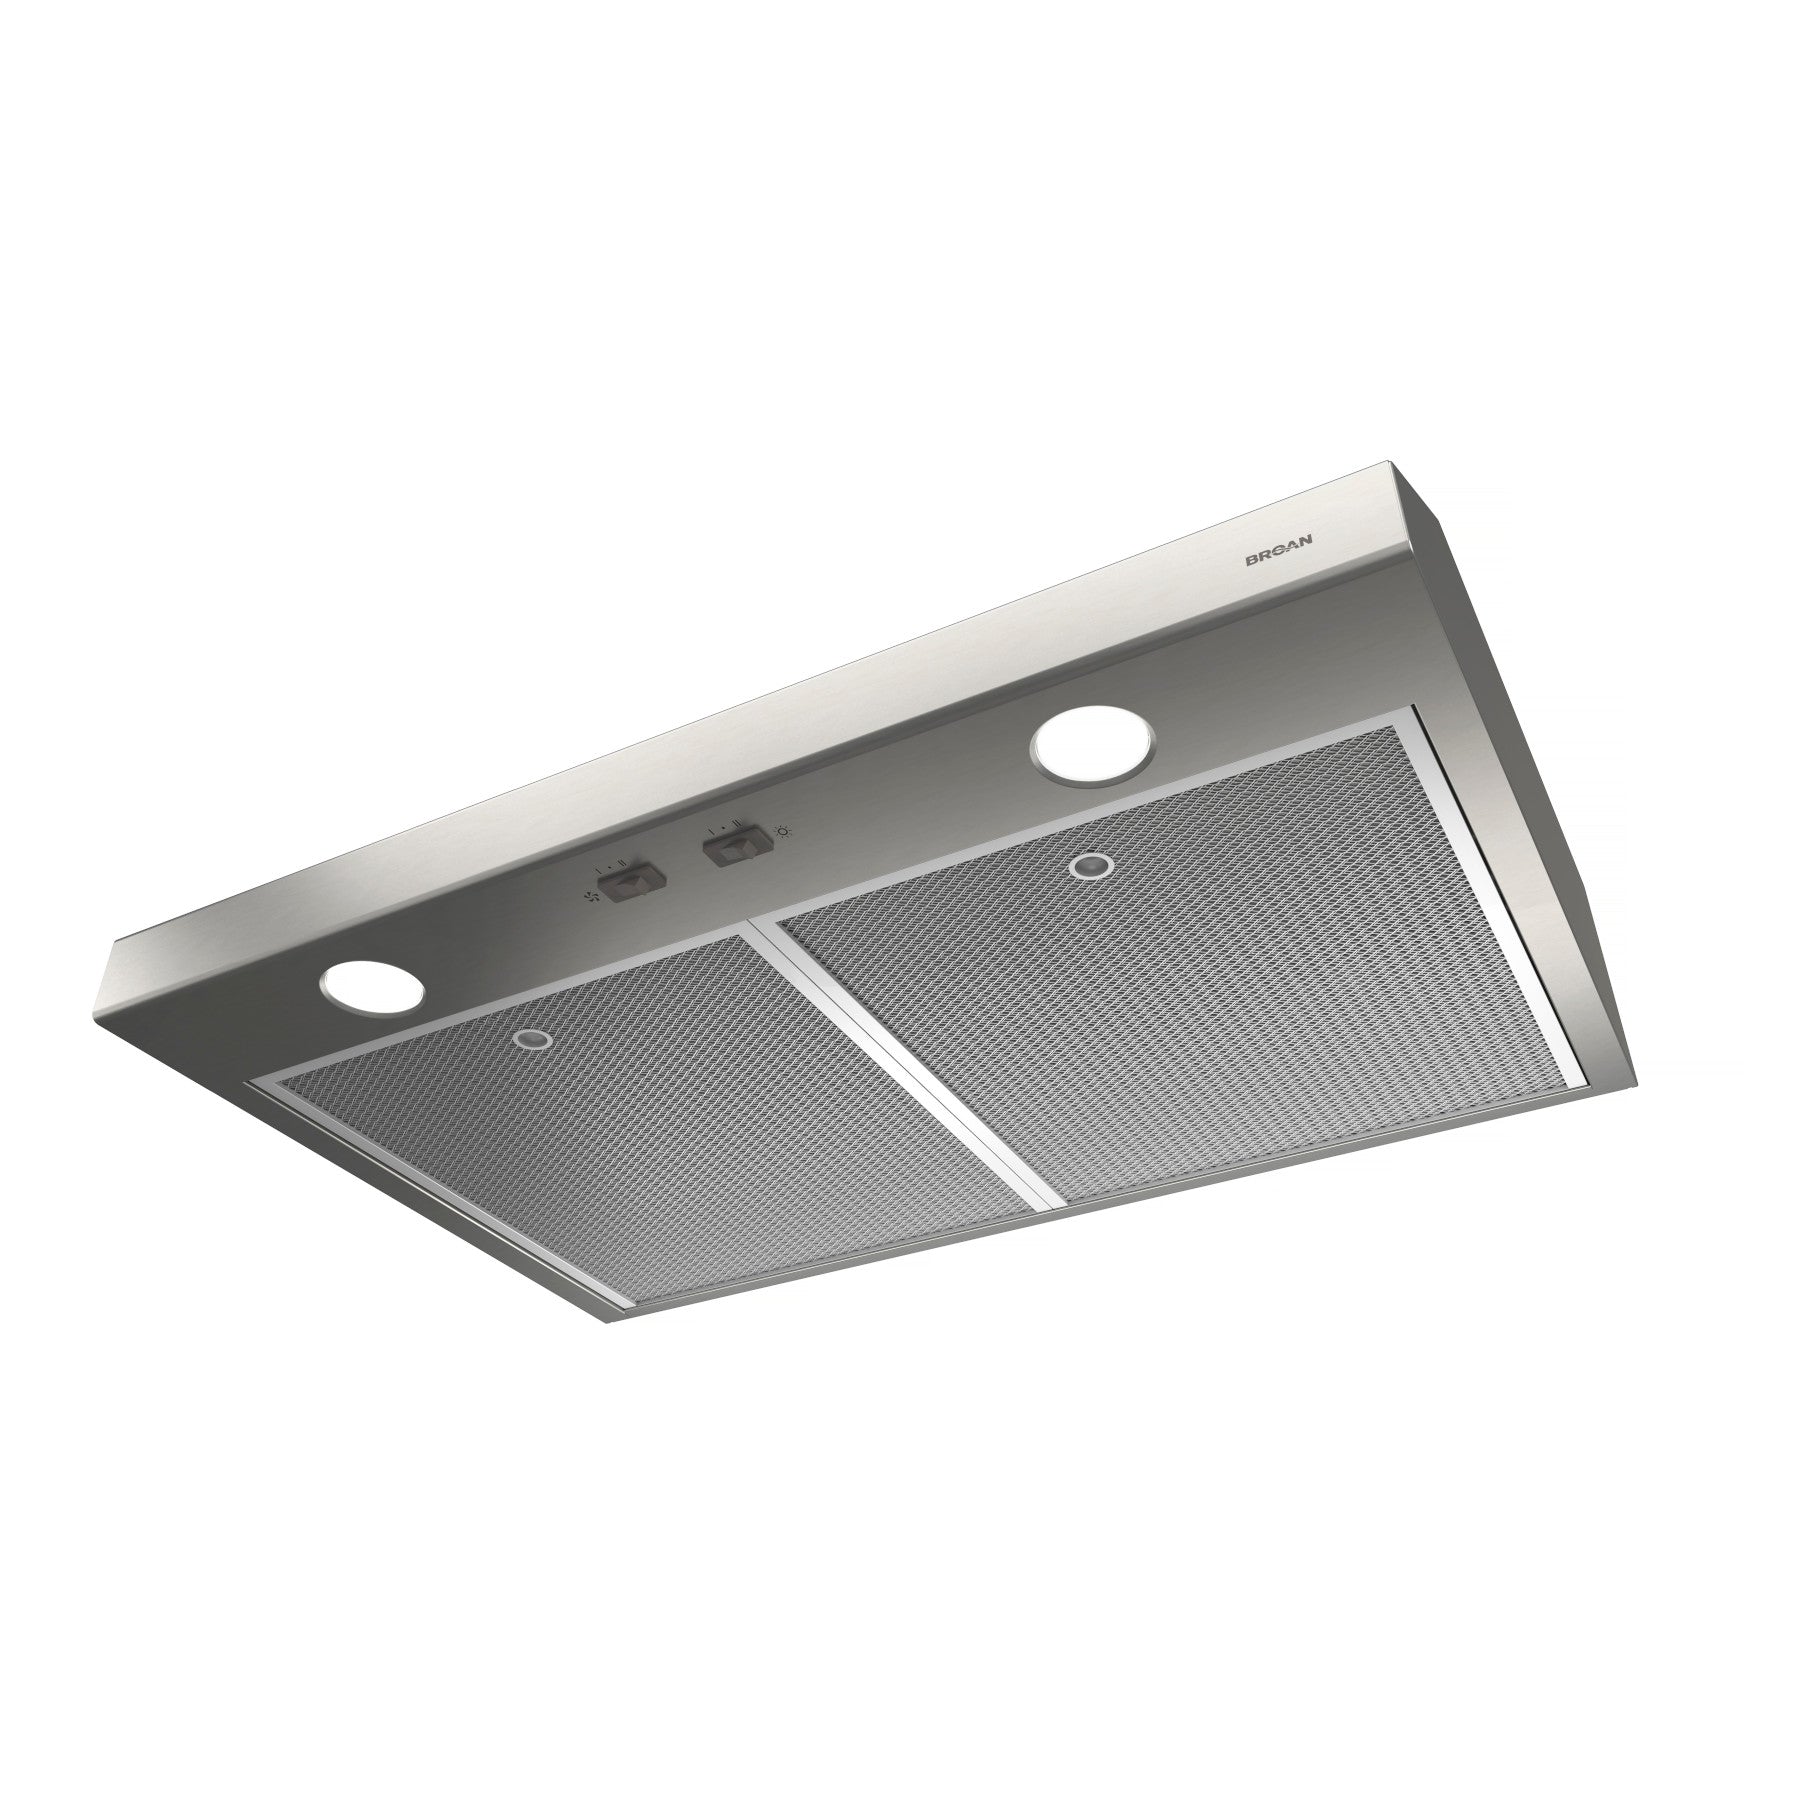 Broan - 24 Inch 300 CFM Under Cabinet Range Vent in Stainless - BCS324SSC